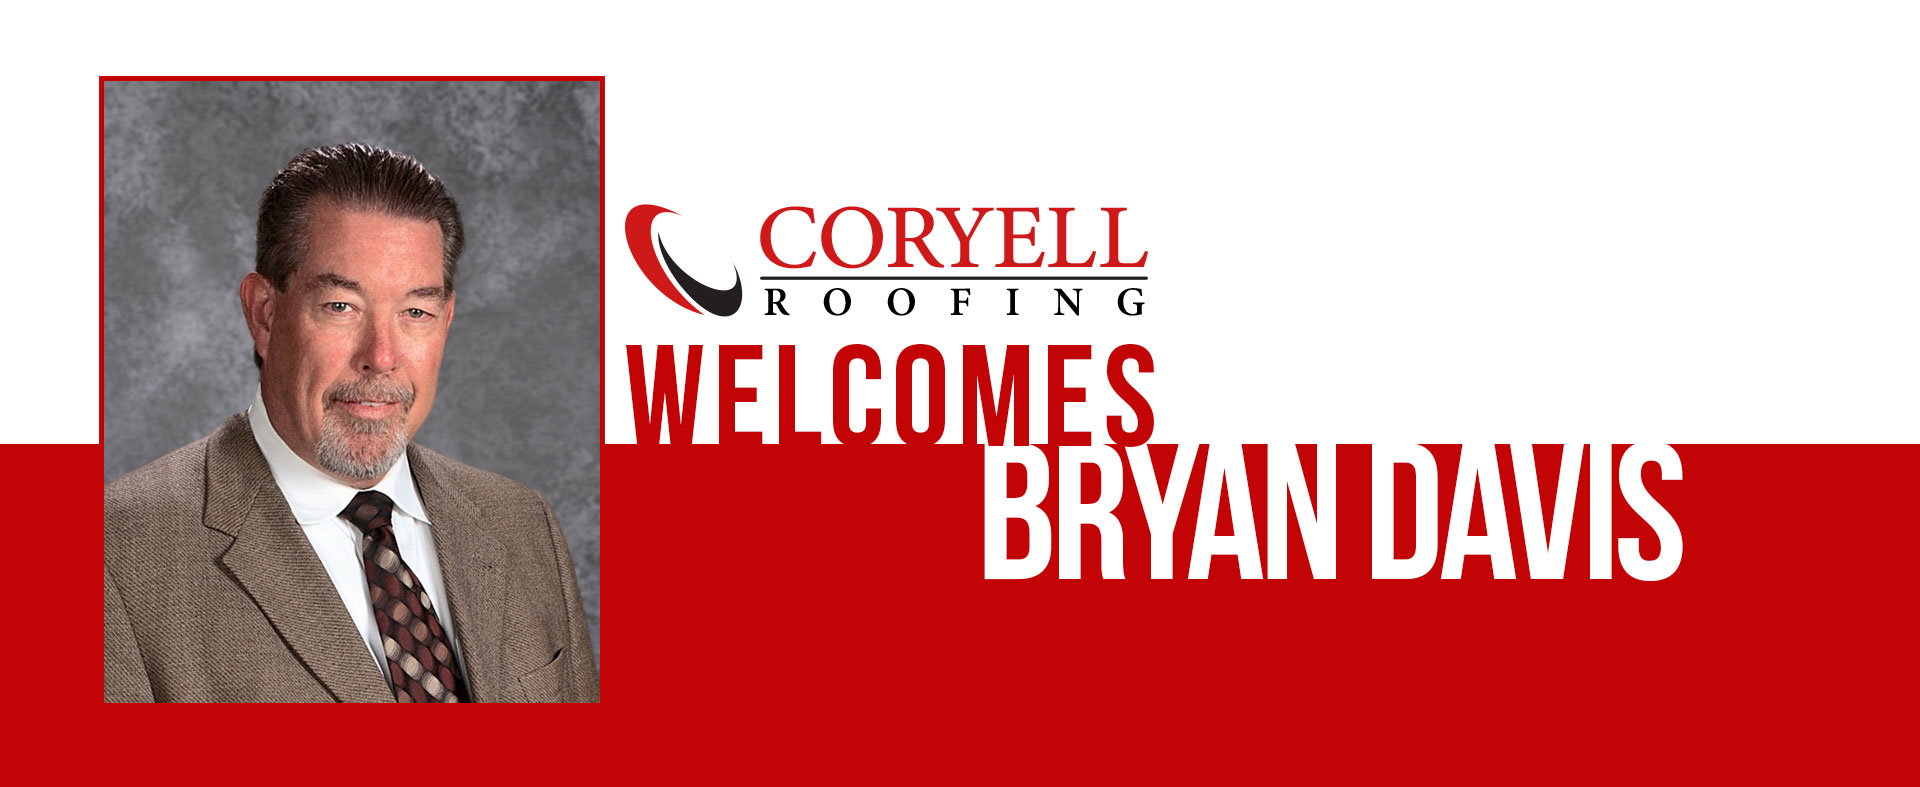 Coryell Roofing Welcomes Bryan Davis to the Team